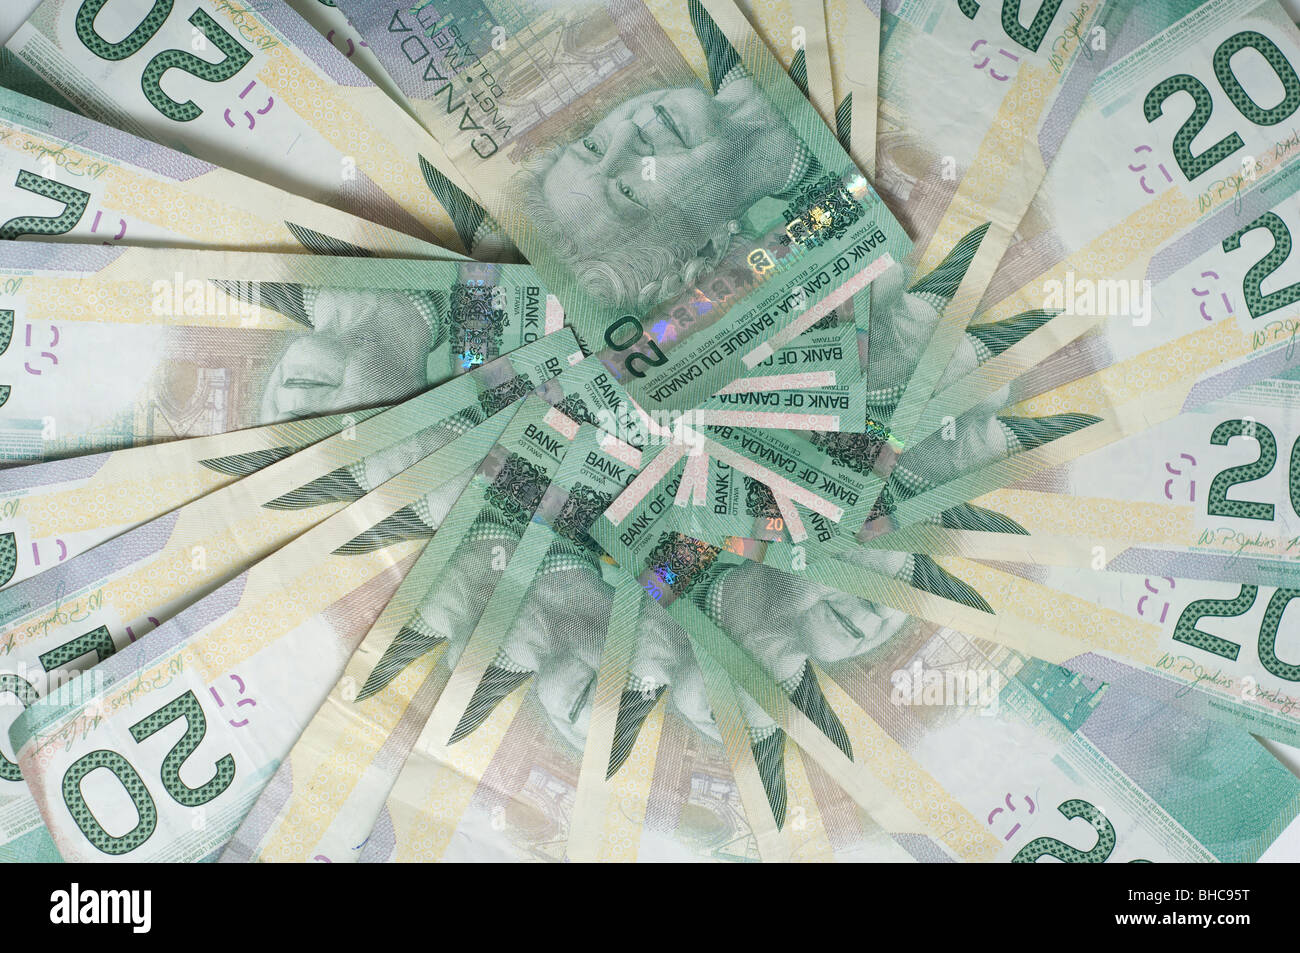 A large amount of Canadian 20 dollar bills arranged in a circle, filling the frame Stock Photo